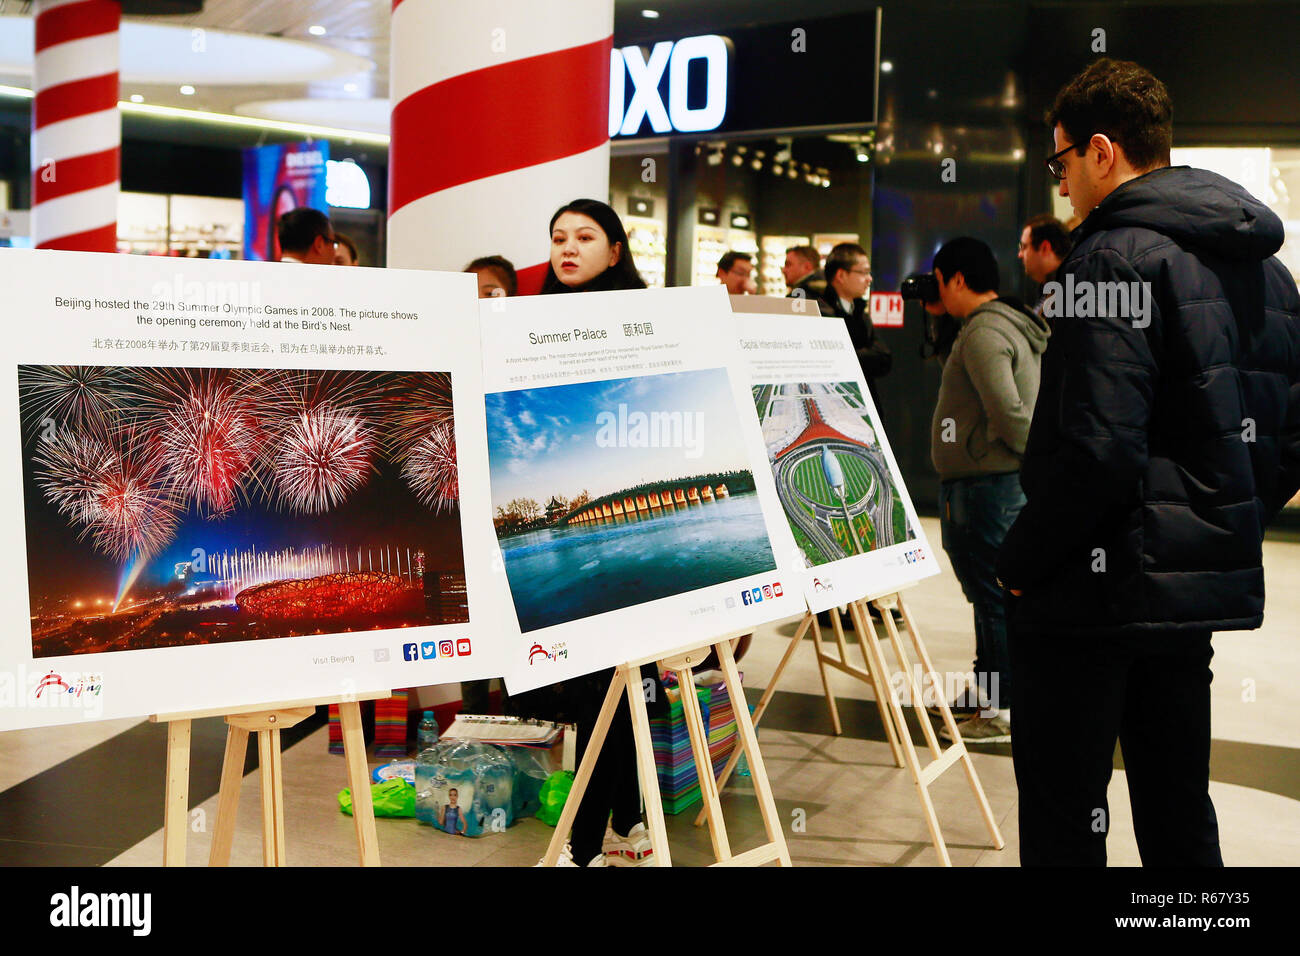 Bucharest, Romania. 3rd Dec, 2018. A visitor looks at Beijing travel pictures during 'Charming Beijing' tourism promotion event in Bucharest, capital of Romania, on Dec. 3, 2018. The tourism promotion event kicked off on Monday at the Promenada Mall in northern Bucharest, and was attended by officials from both China and Romania. Credit: Cristian Cristel/Xinhua/Alamy Live News Stock Photo